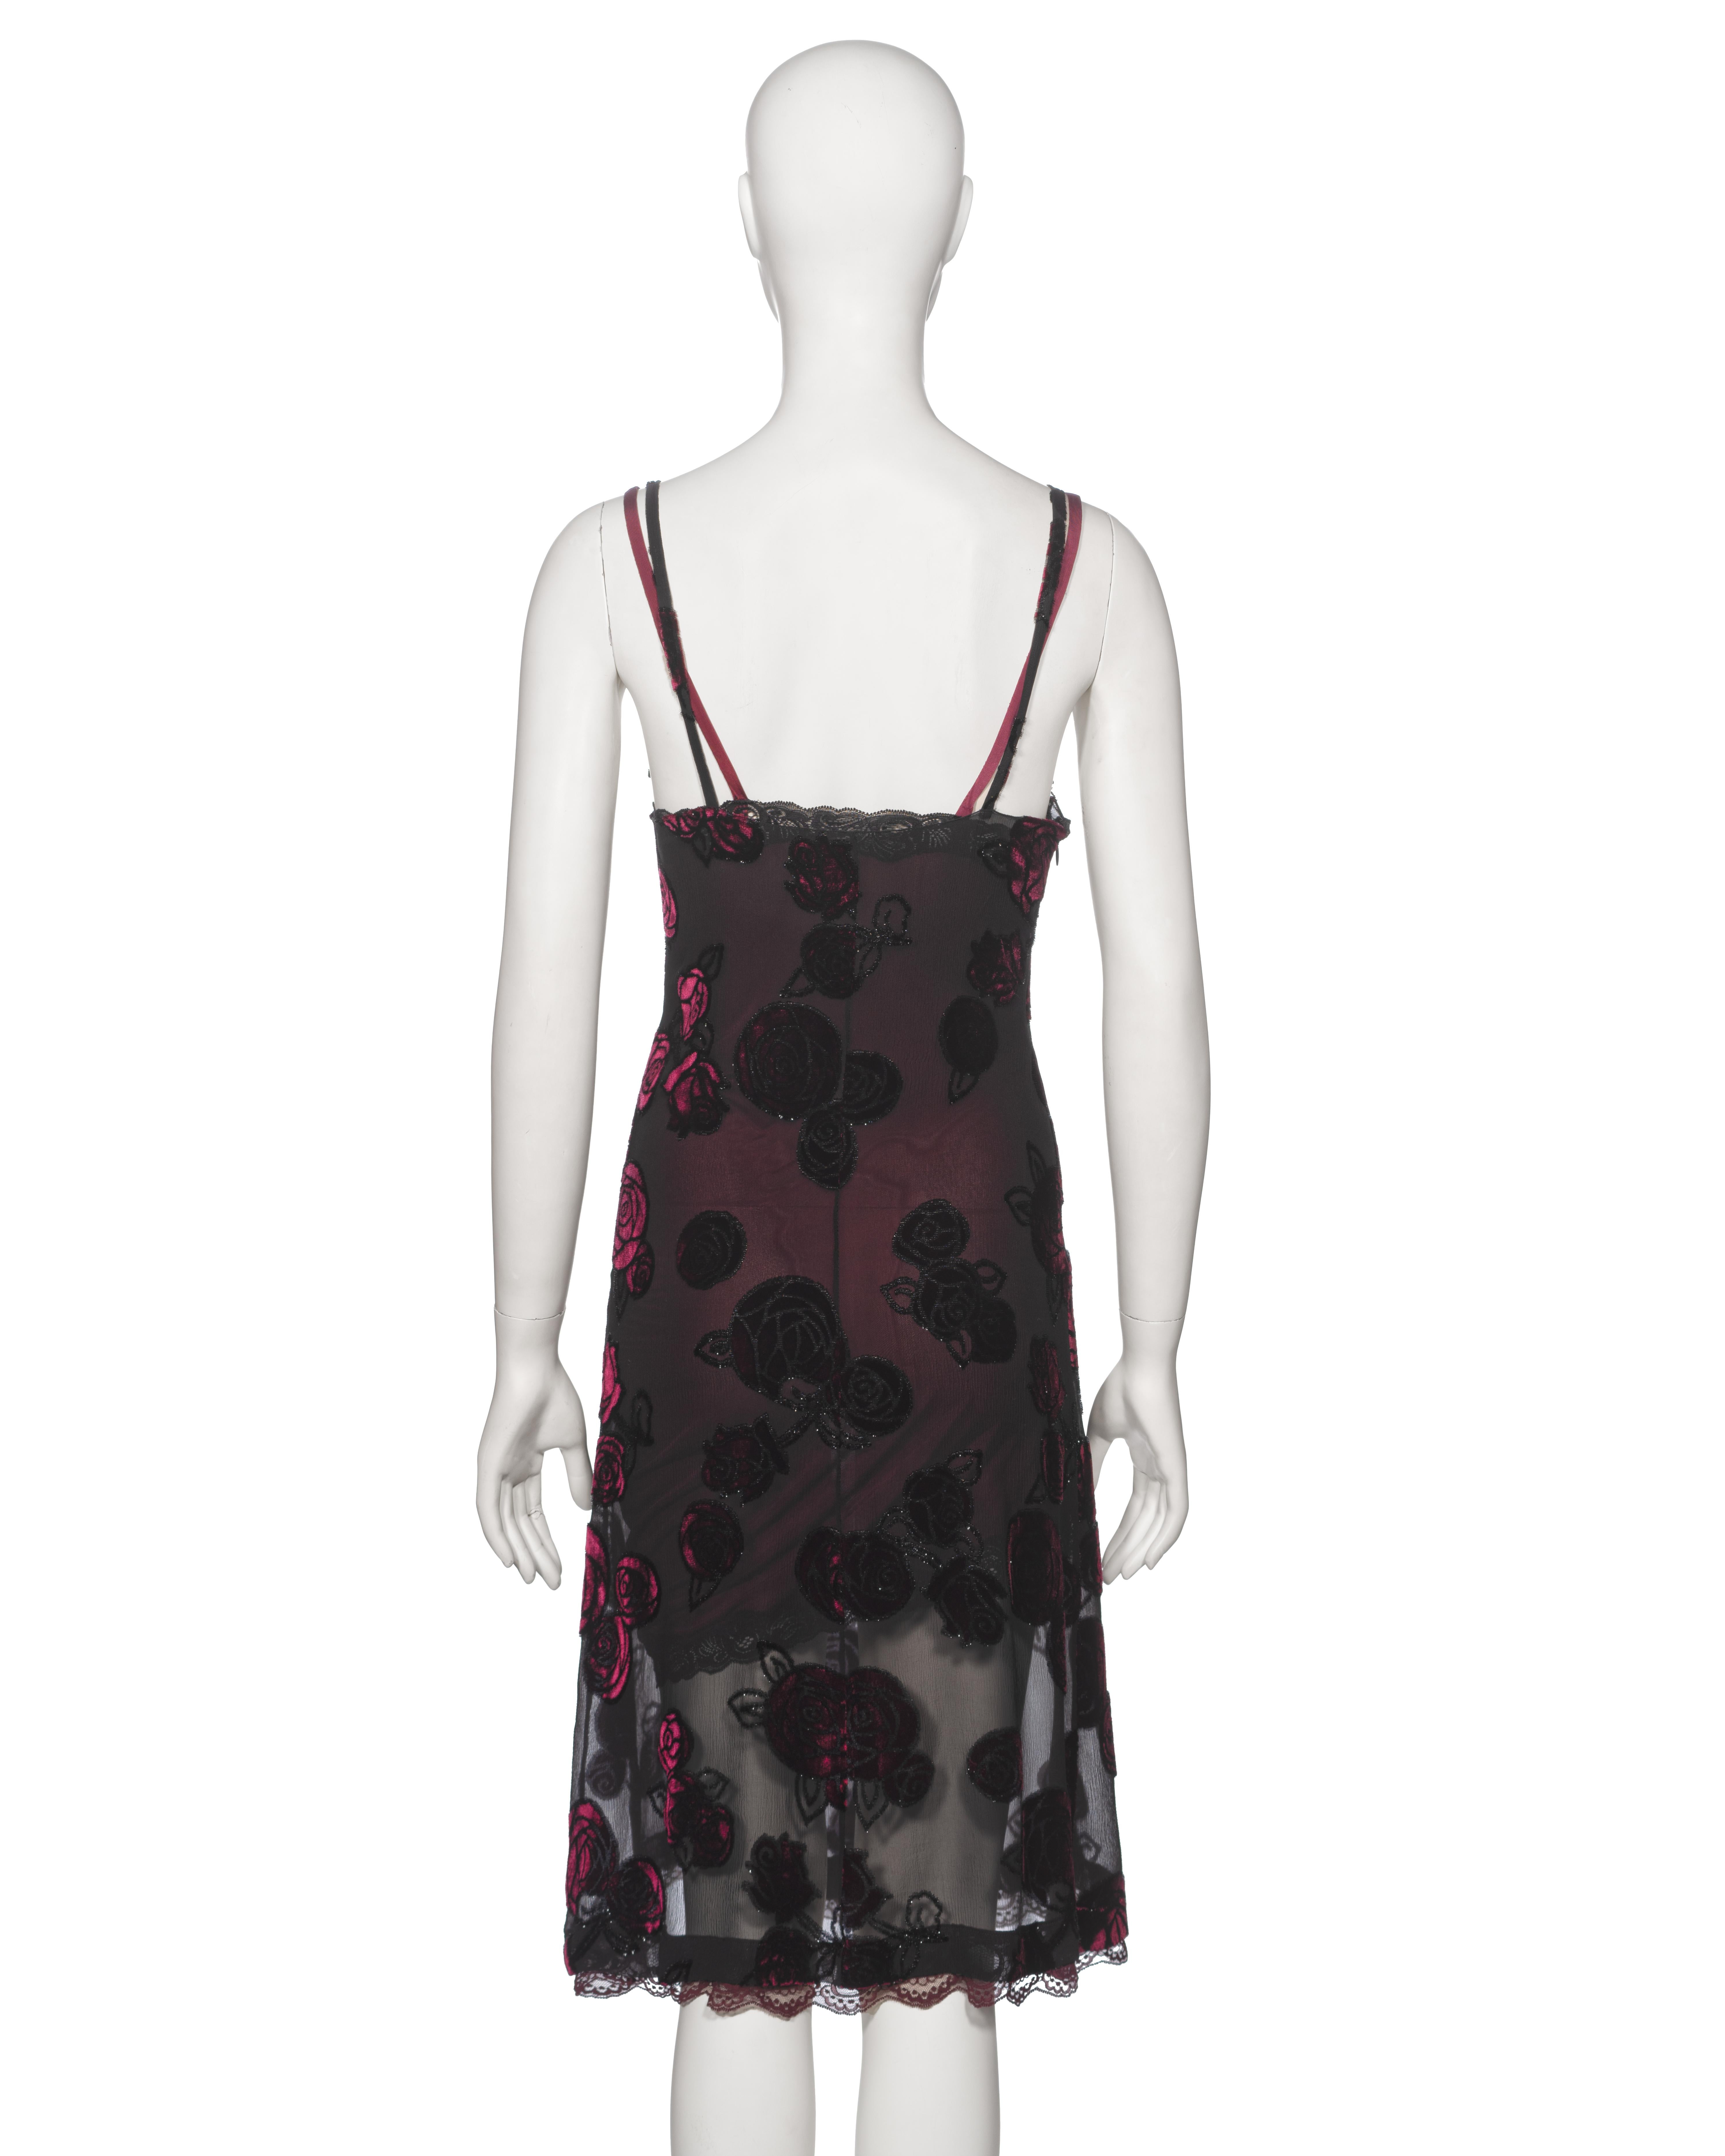 Christian Dior by John Galliano Double Layered Bordeaux Slip Dress, FW 2005 For Sale 5